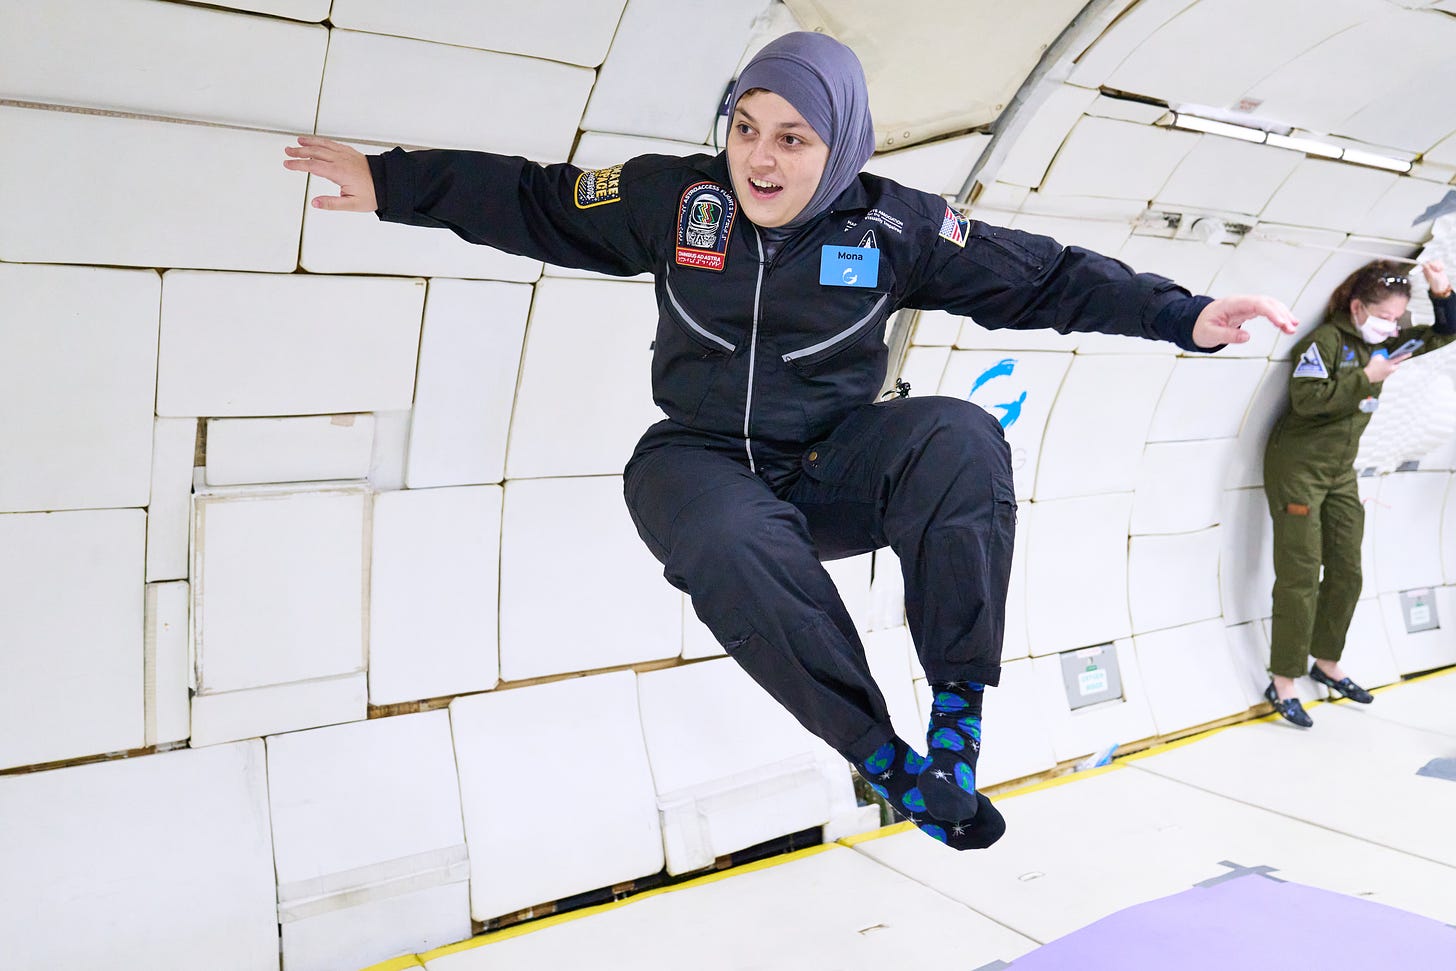 Dr. Mona Minkara is wearing a black flight jump suit and grey hijab. She is inside a G-Force One, a modified Boeing 727-200. Mona is smiling and has both hands outstretched wide, with her right hand on the side of the Zero-G aircraft. Both legs are bent at the knees as though Mona were sitting in a chair with her feet crossed. She is wearing a dark blue sock with lighter blue clouds on them and black Mary Jane style shoes as she floats weightlessly in the seatless  aircraft. In the background, is a dark haired woman in an olive green flight suit deck shoes. She’s wearing a mask and looking at her cell phone as she holds on to a bar on the side of the aircraft with her other hand.